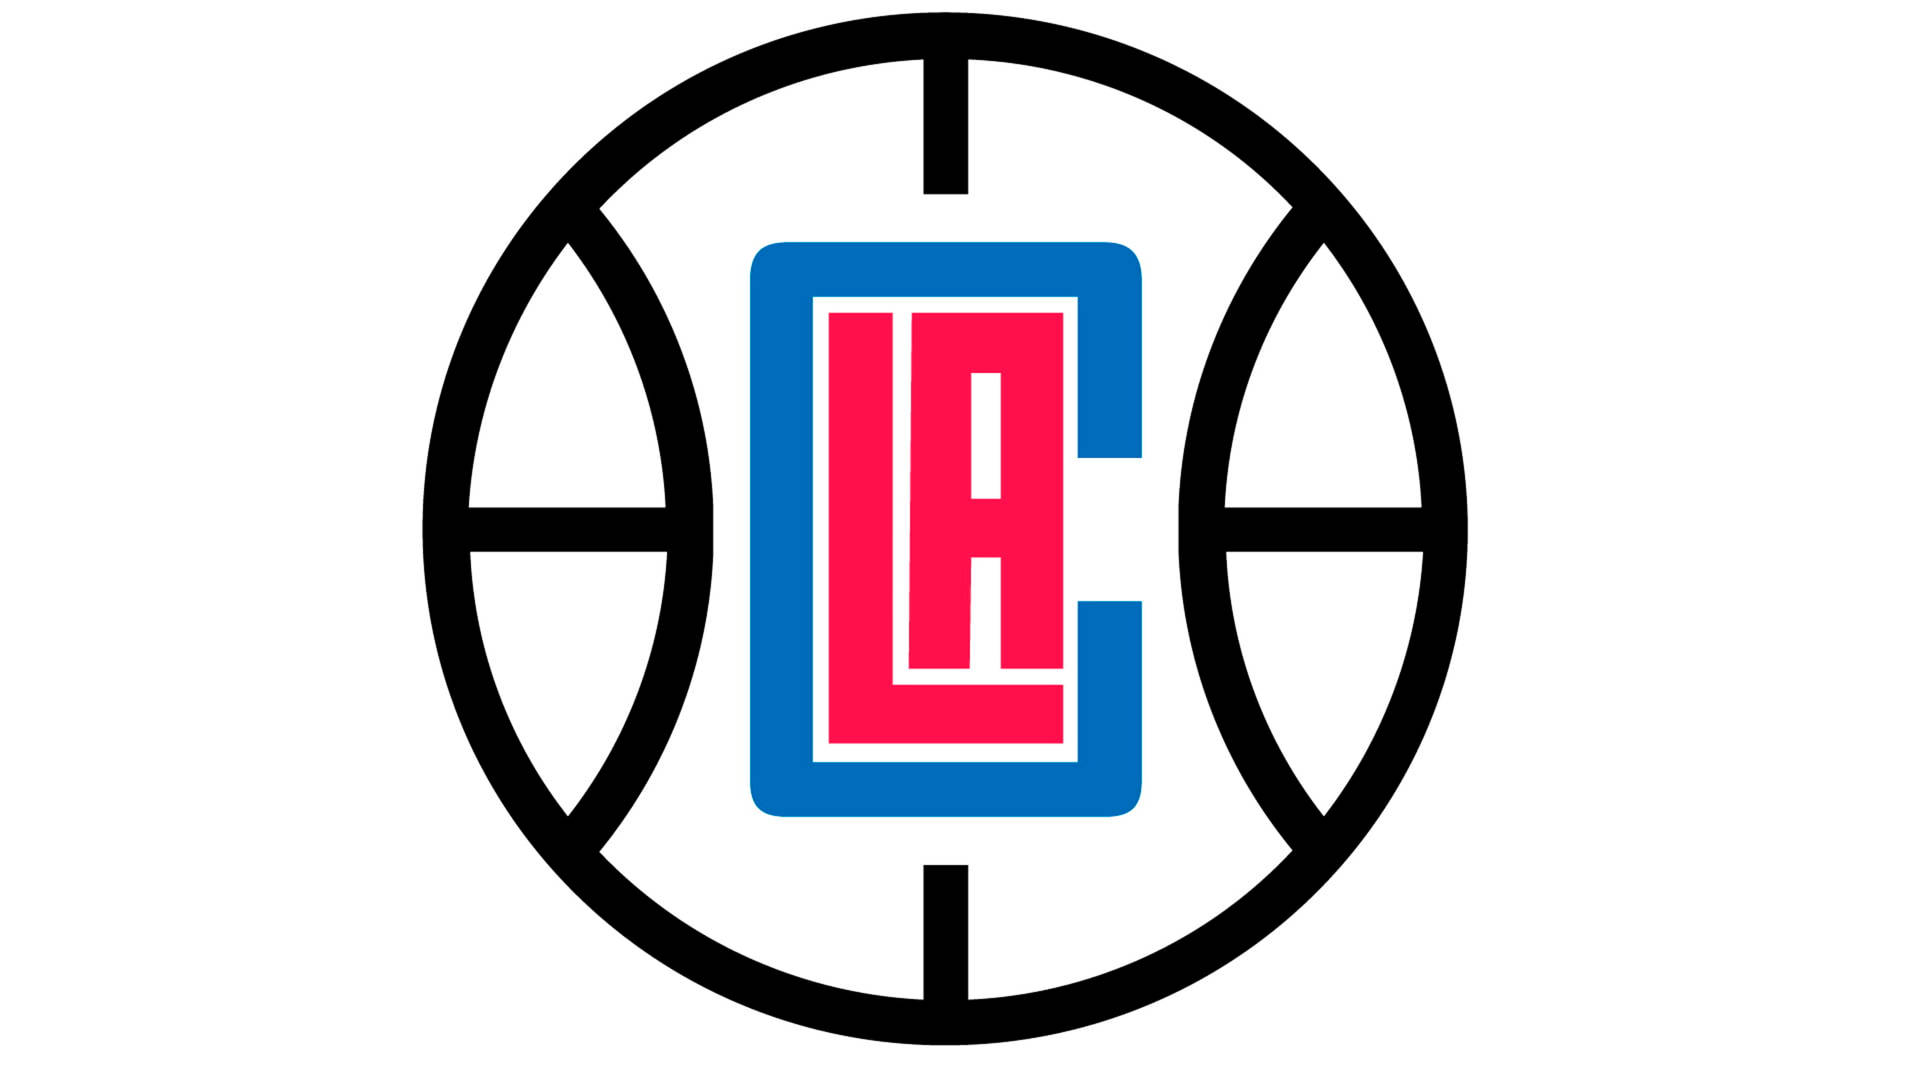 Los Angeles Clippers 2015 Logo Wallpaper